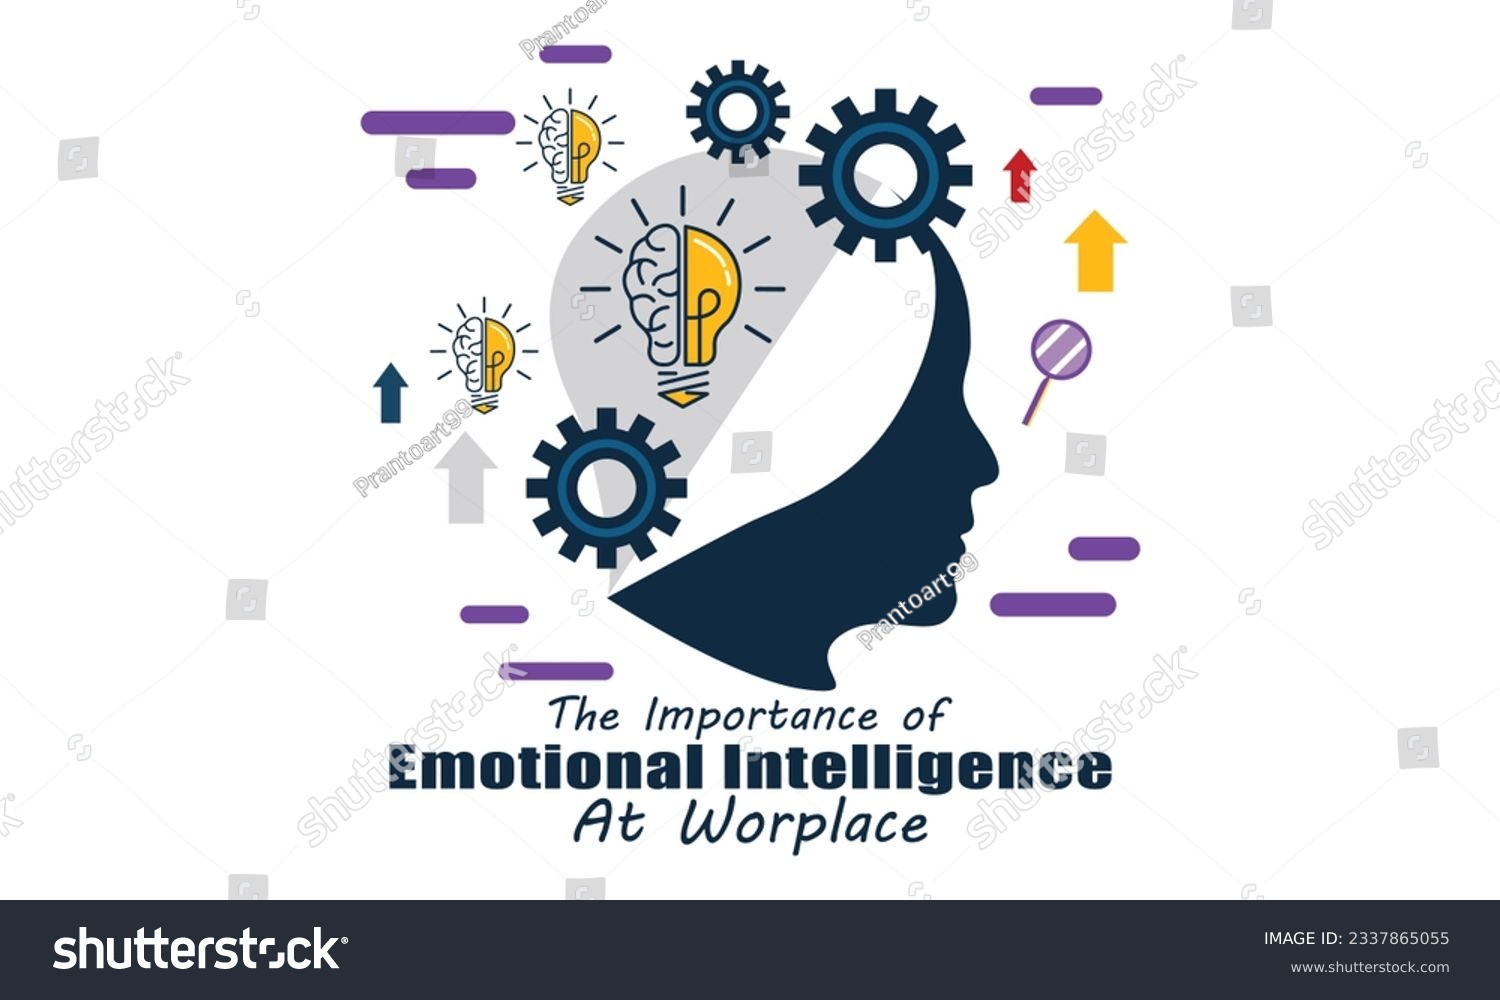 SVG of Emotional Intelligence at Workplace Neuron Anatomy of Human Cell Line Art Vector and Illustration Design. Neuron Anatomy And Human Cell Line Art Design and Creative Kids. svg